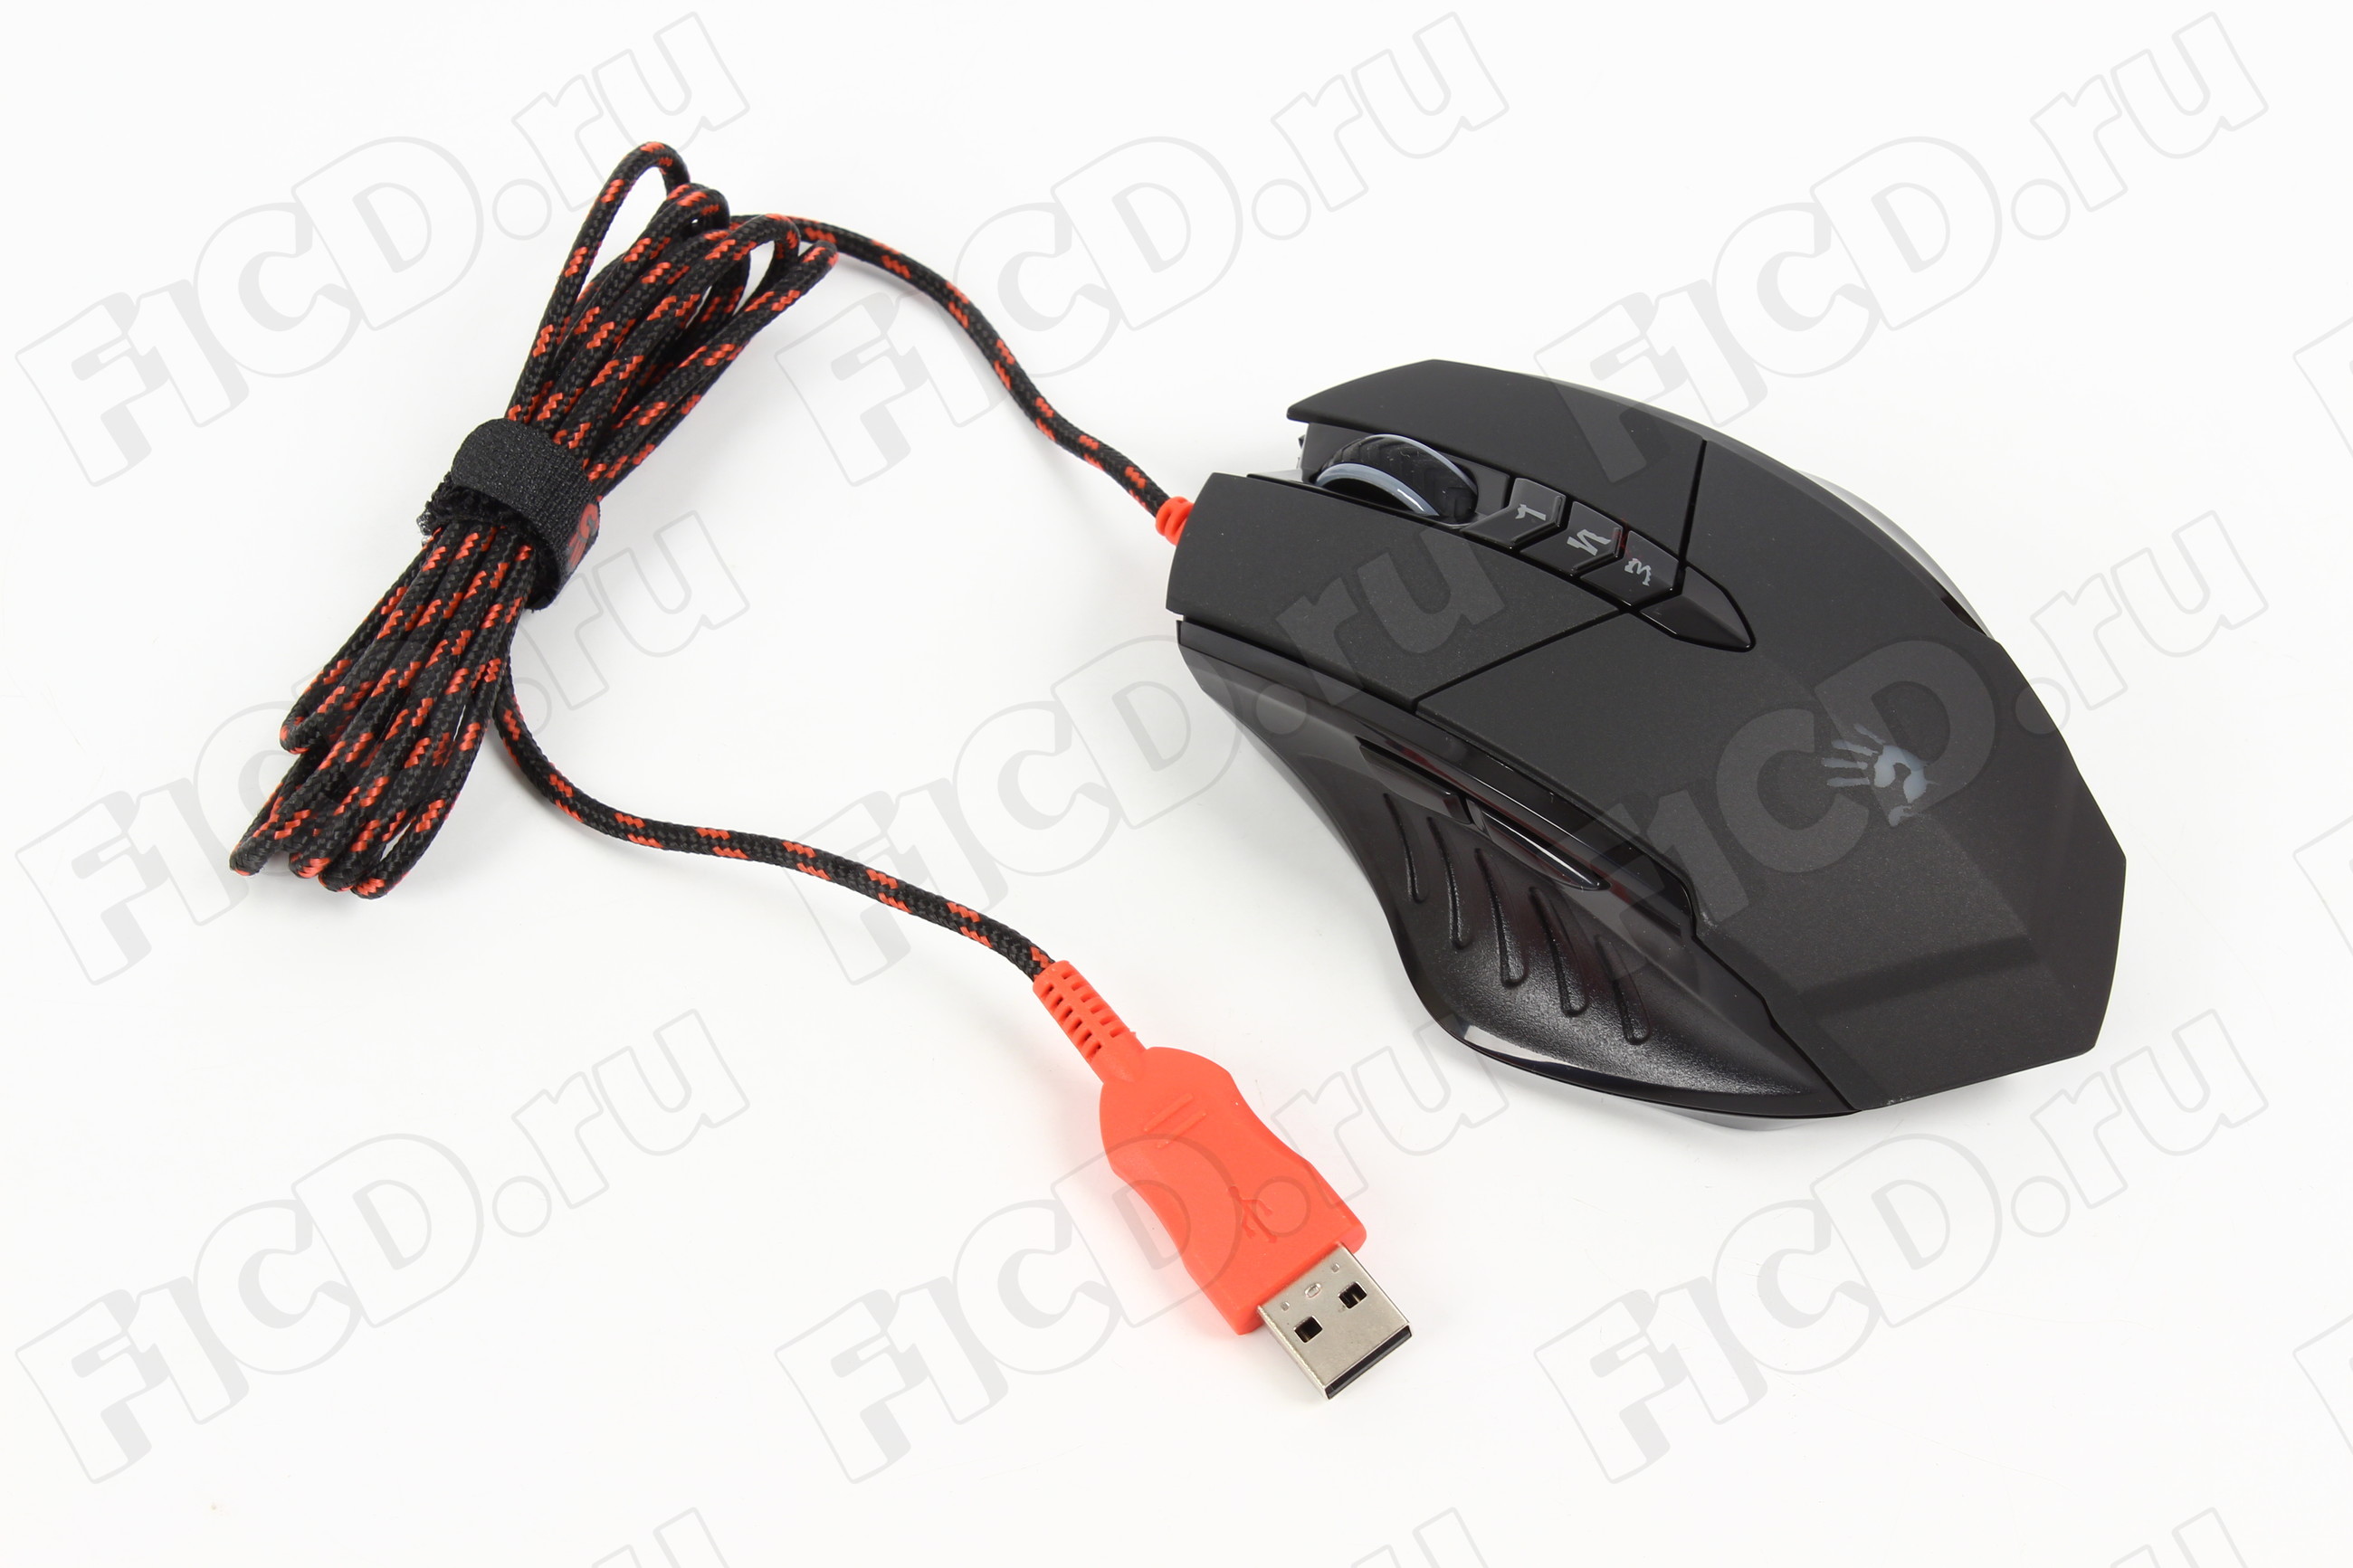 Blacklisted device bloody mouse a4tech rust x7 фото 65